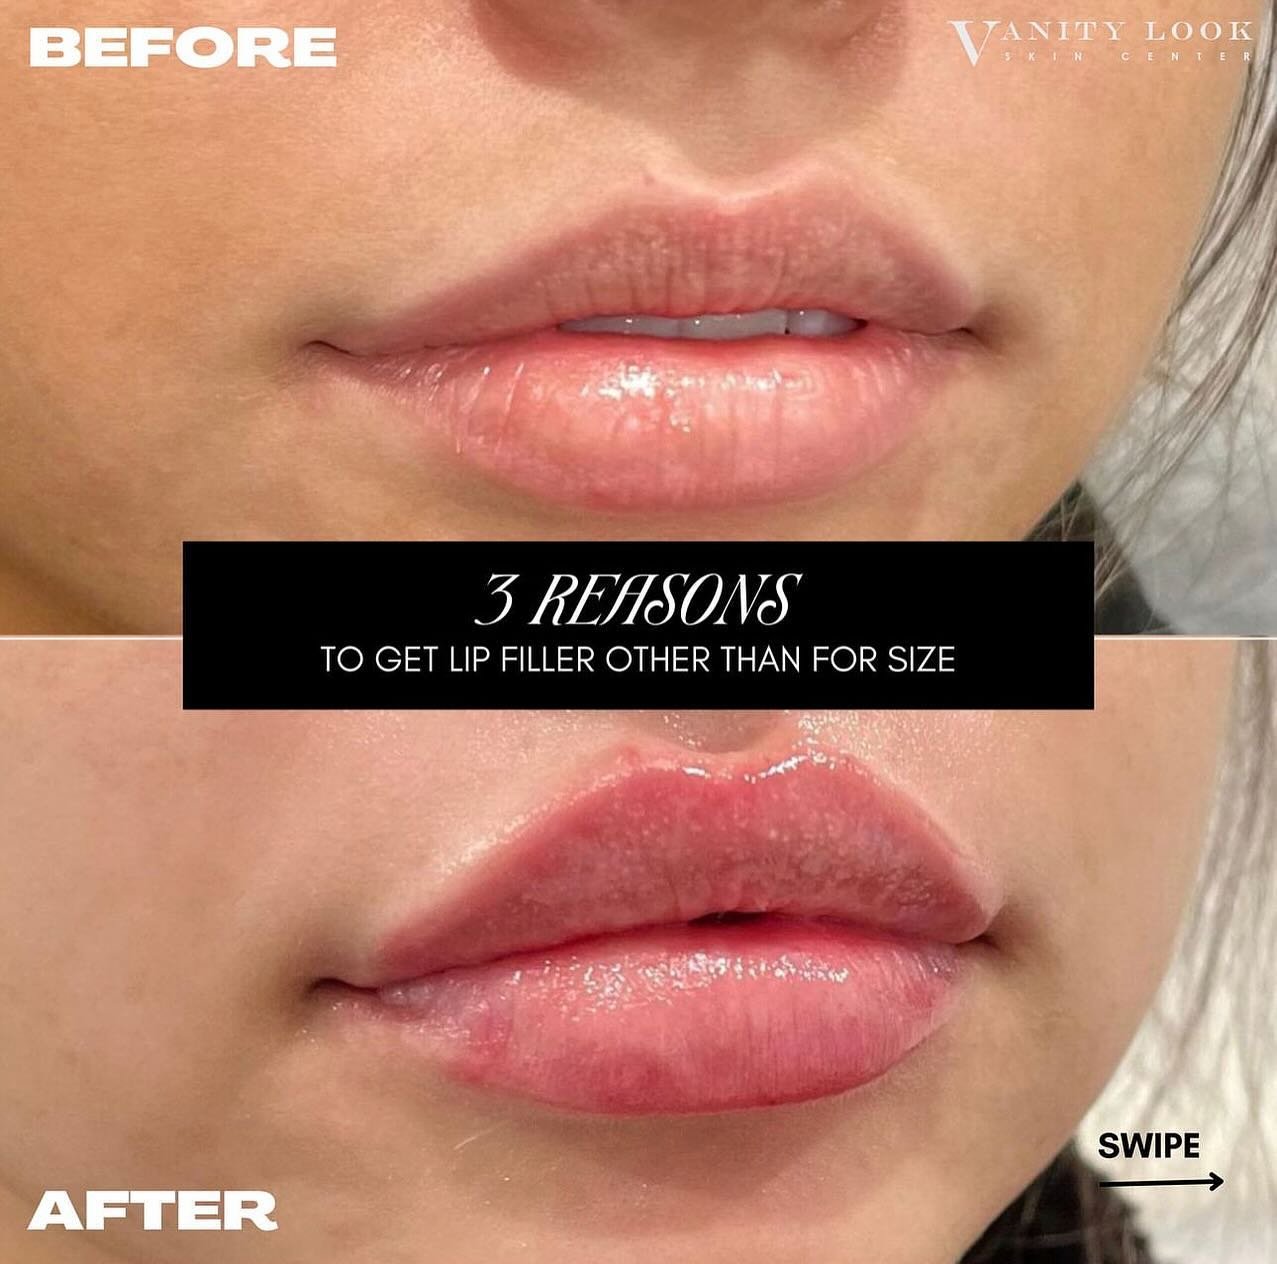 SWIPE ➡️ to see 3 reasons to do your lips other than for size! 

#facialbalance #lipfiller #chinfiller #aesthetic #luxury #facialbalancing #skincare #skincareroutine #aestheticinjector #cosmeticinjectables #cosmeticinjector